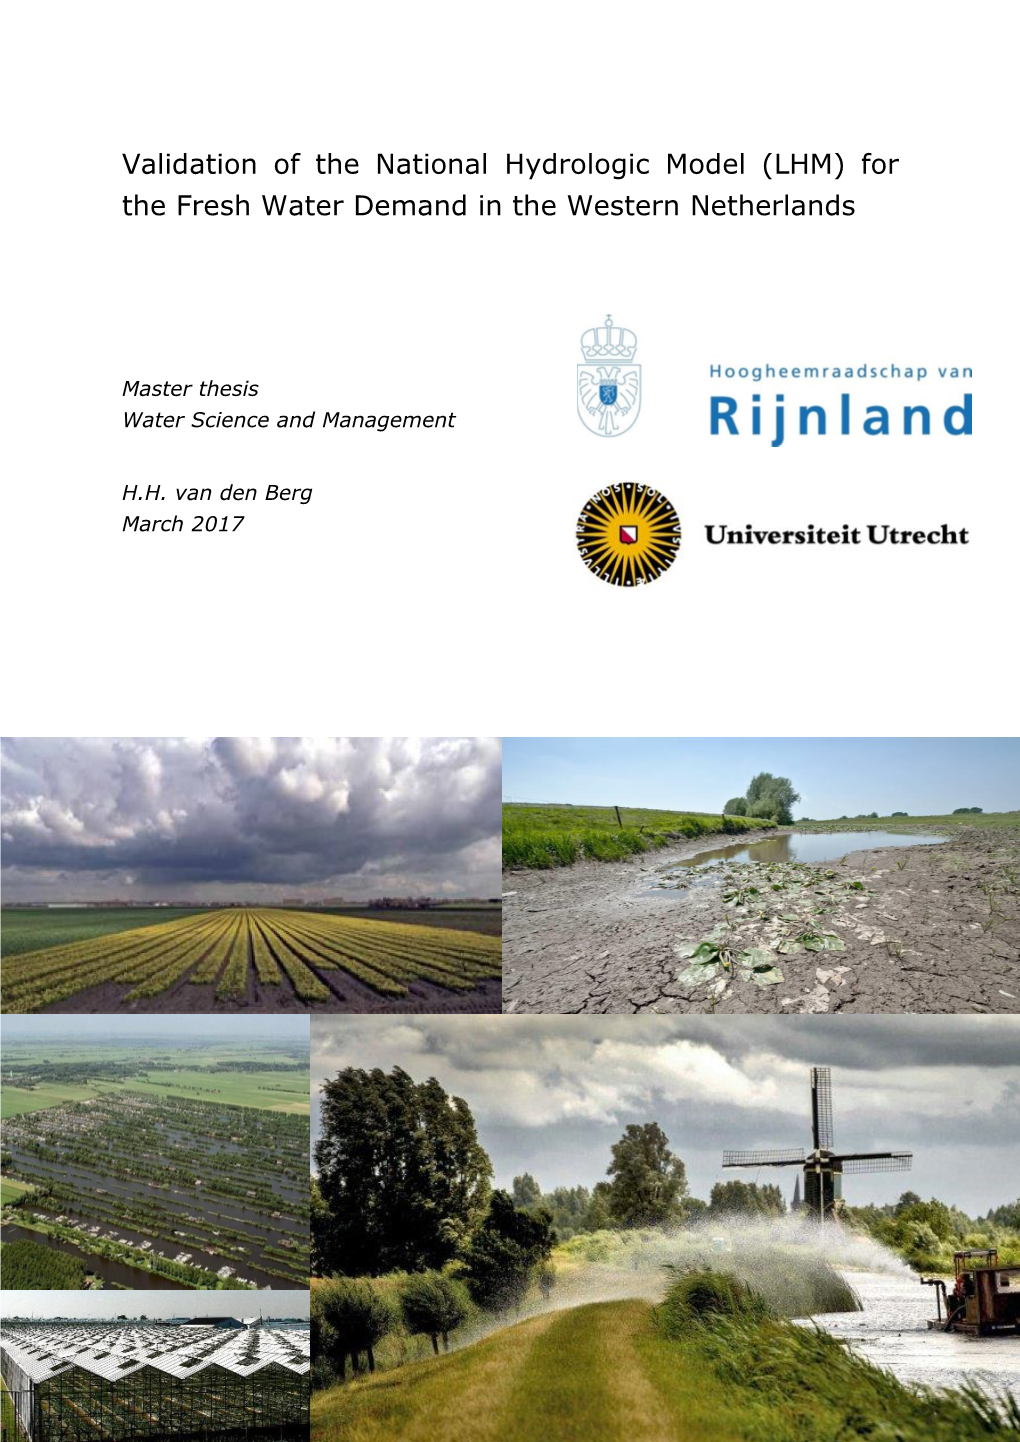 (LHM) for the Fresh Water Demand in the Western Netherlands